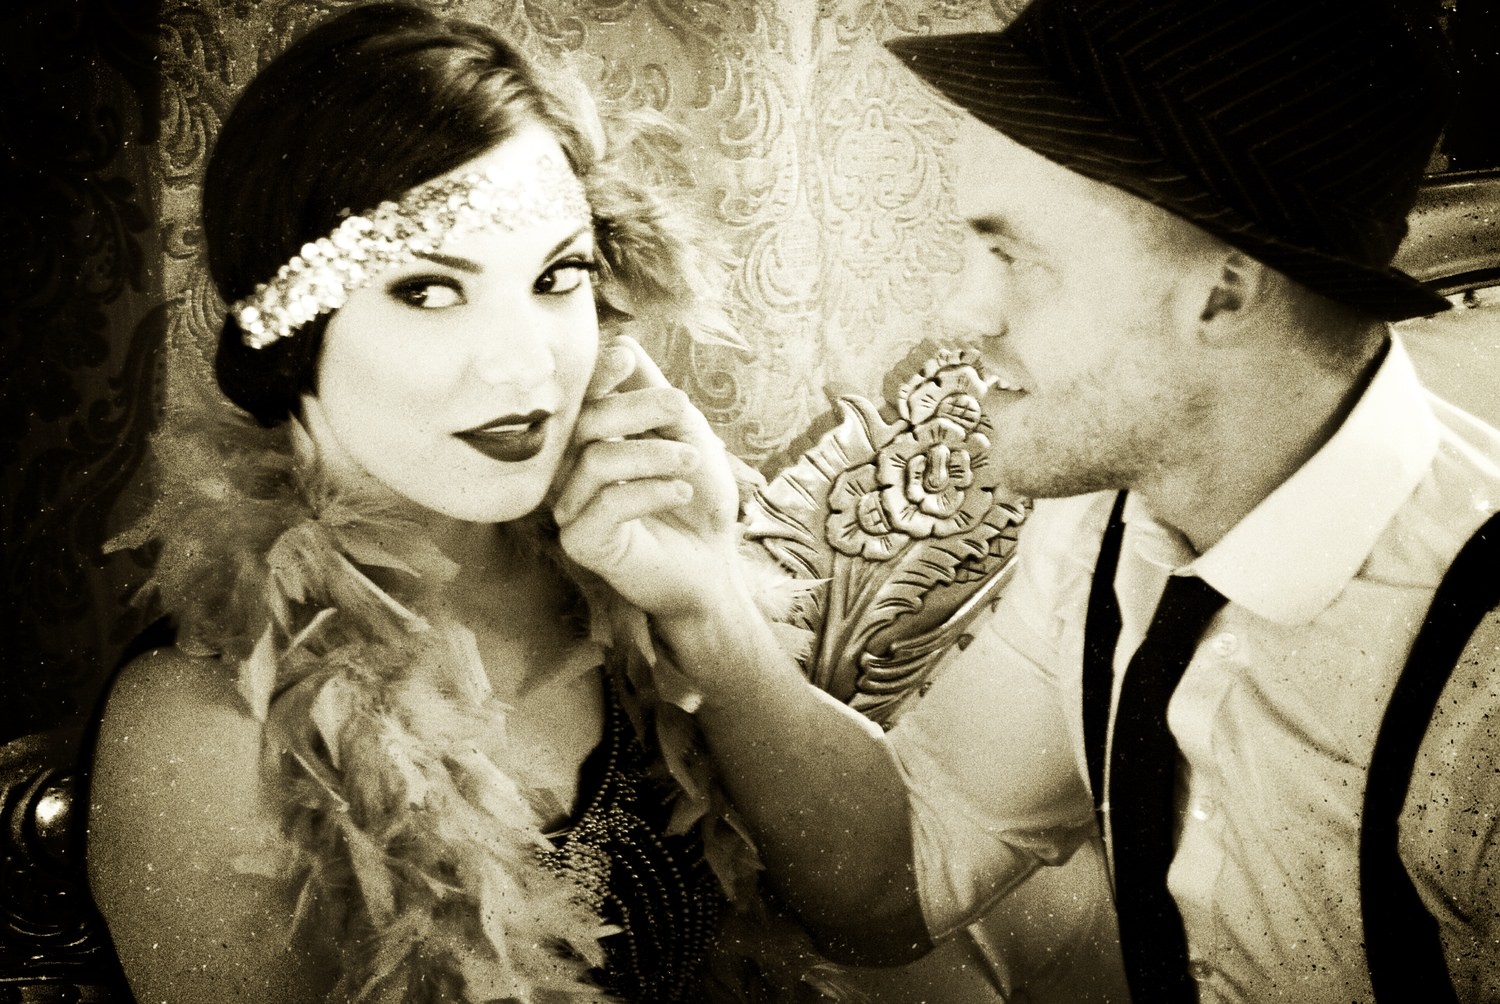 SPEAKEASY, A New Musical takes place in 1928 at the height of the prohibition era in a Chicago speakeasy called The Reading Room - the best gin joint in town. Ragan Richardson portrays Lucie - one of the Reading Room singers and Kiefer Slaton portrays Jake - a bootlegger and gangster.